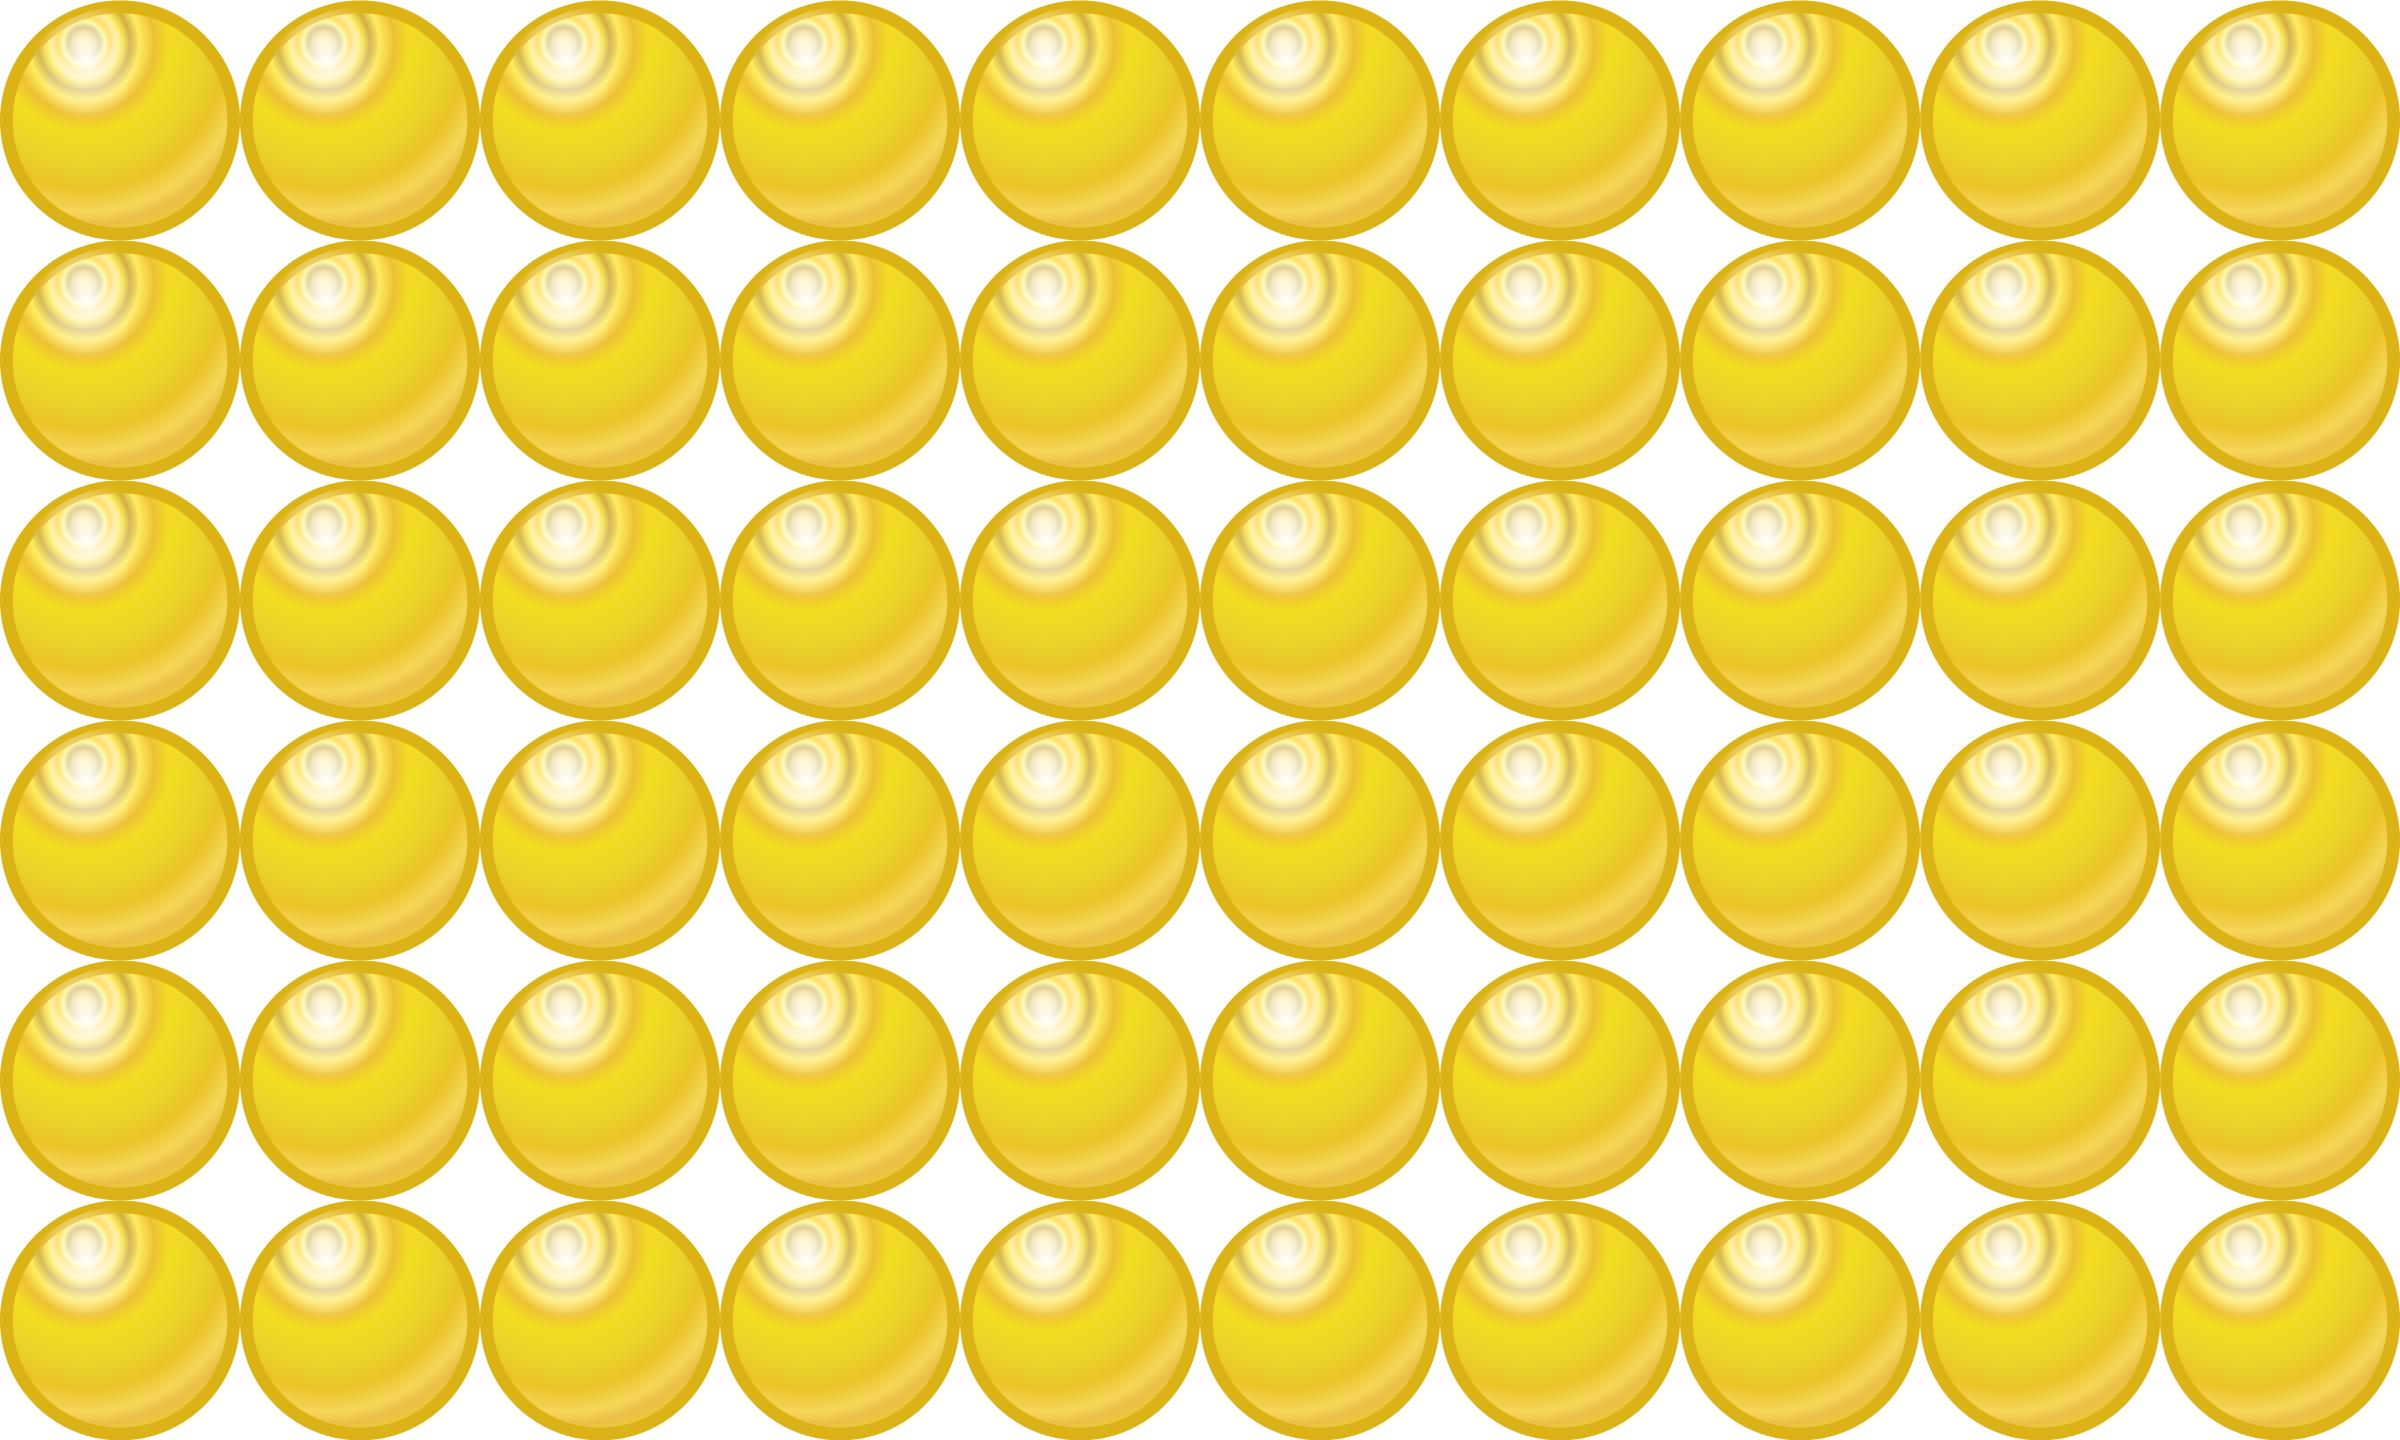 Beads quantitative picture for multiplication 6x10 png